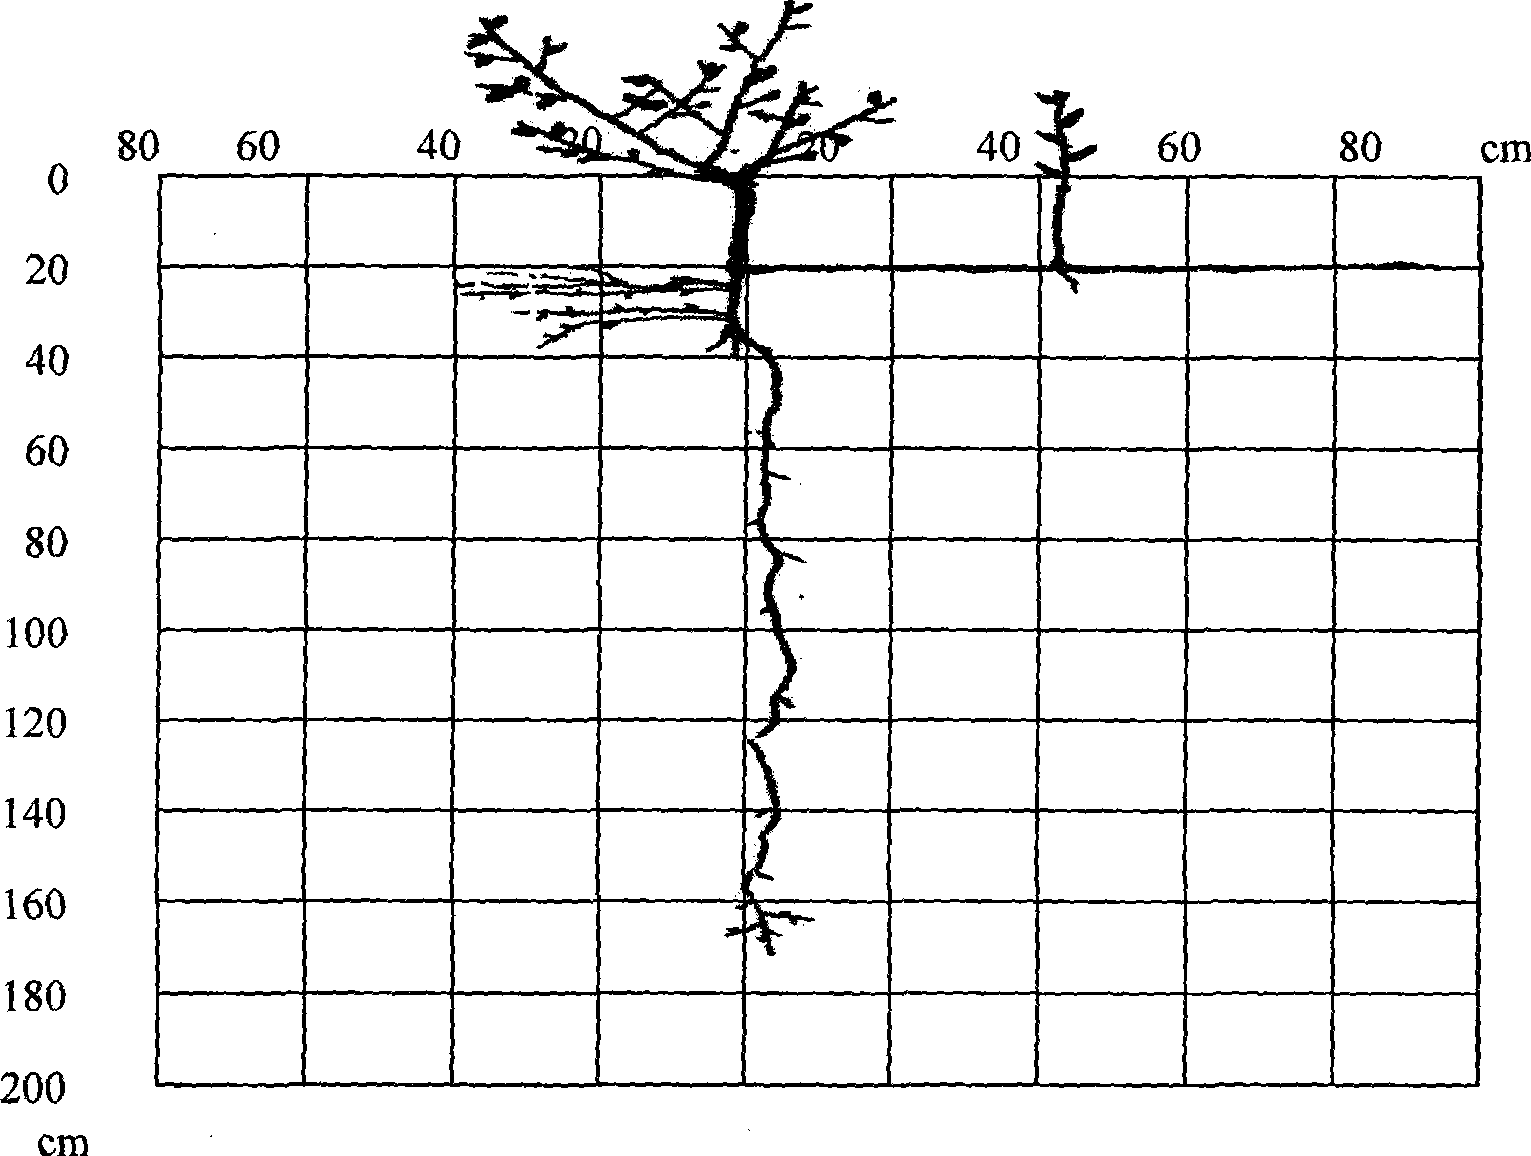 Groundwater buried depth abductive technique of desert plant seedling root system growth